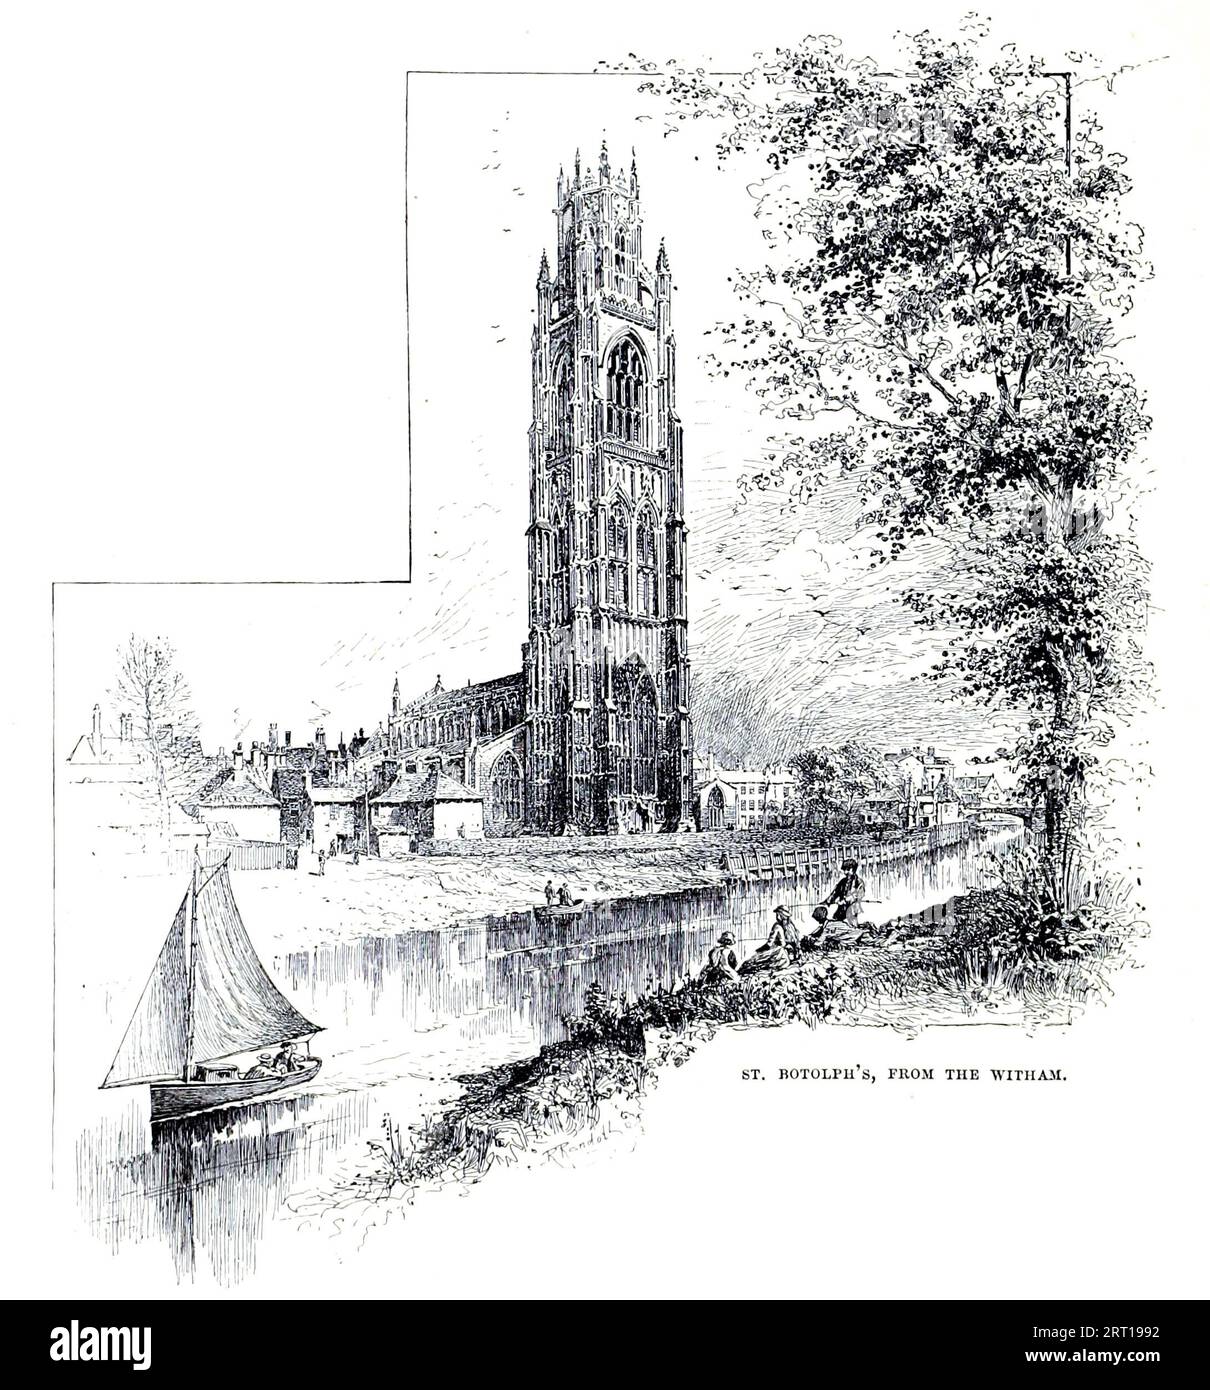 St. Botolph's from the Witham Boston, Lincolnshire from the book ' Cathedrals, abbeys and churches of England and Wales : descriptive, historical, pictorial ' by Bonney, T. G. (Thomas George), 1833-1923; Publisher London : Cassell 1890 Stock Photo